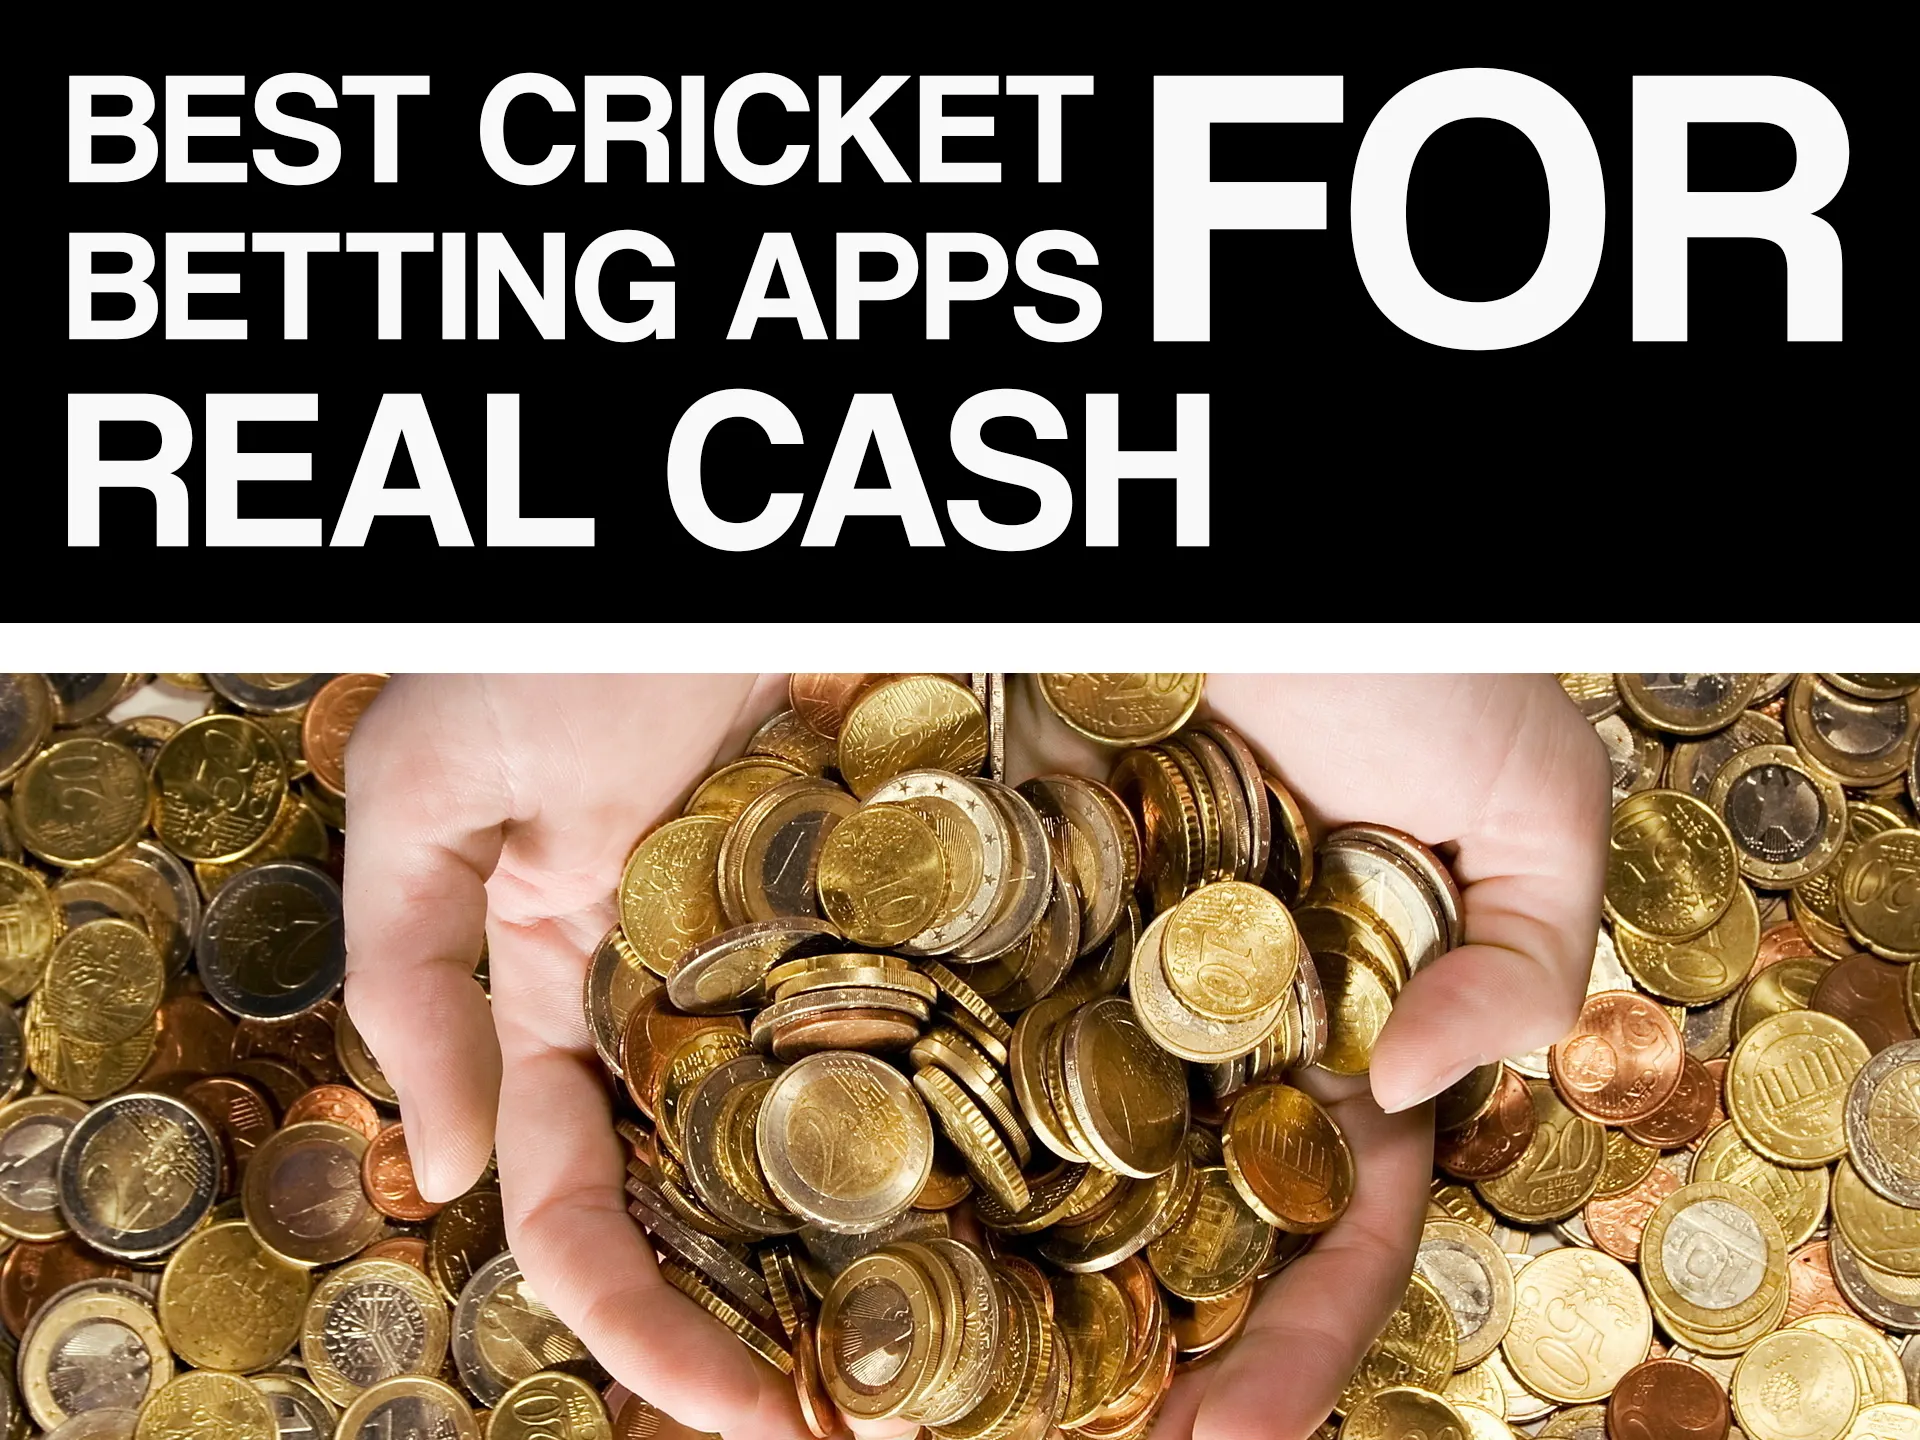 I Don't Want To Spend This Much Time On IPL betting app india. How About You?